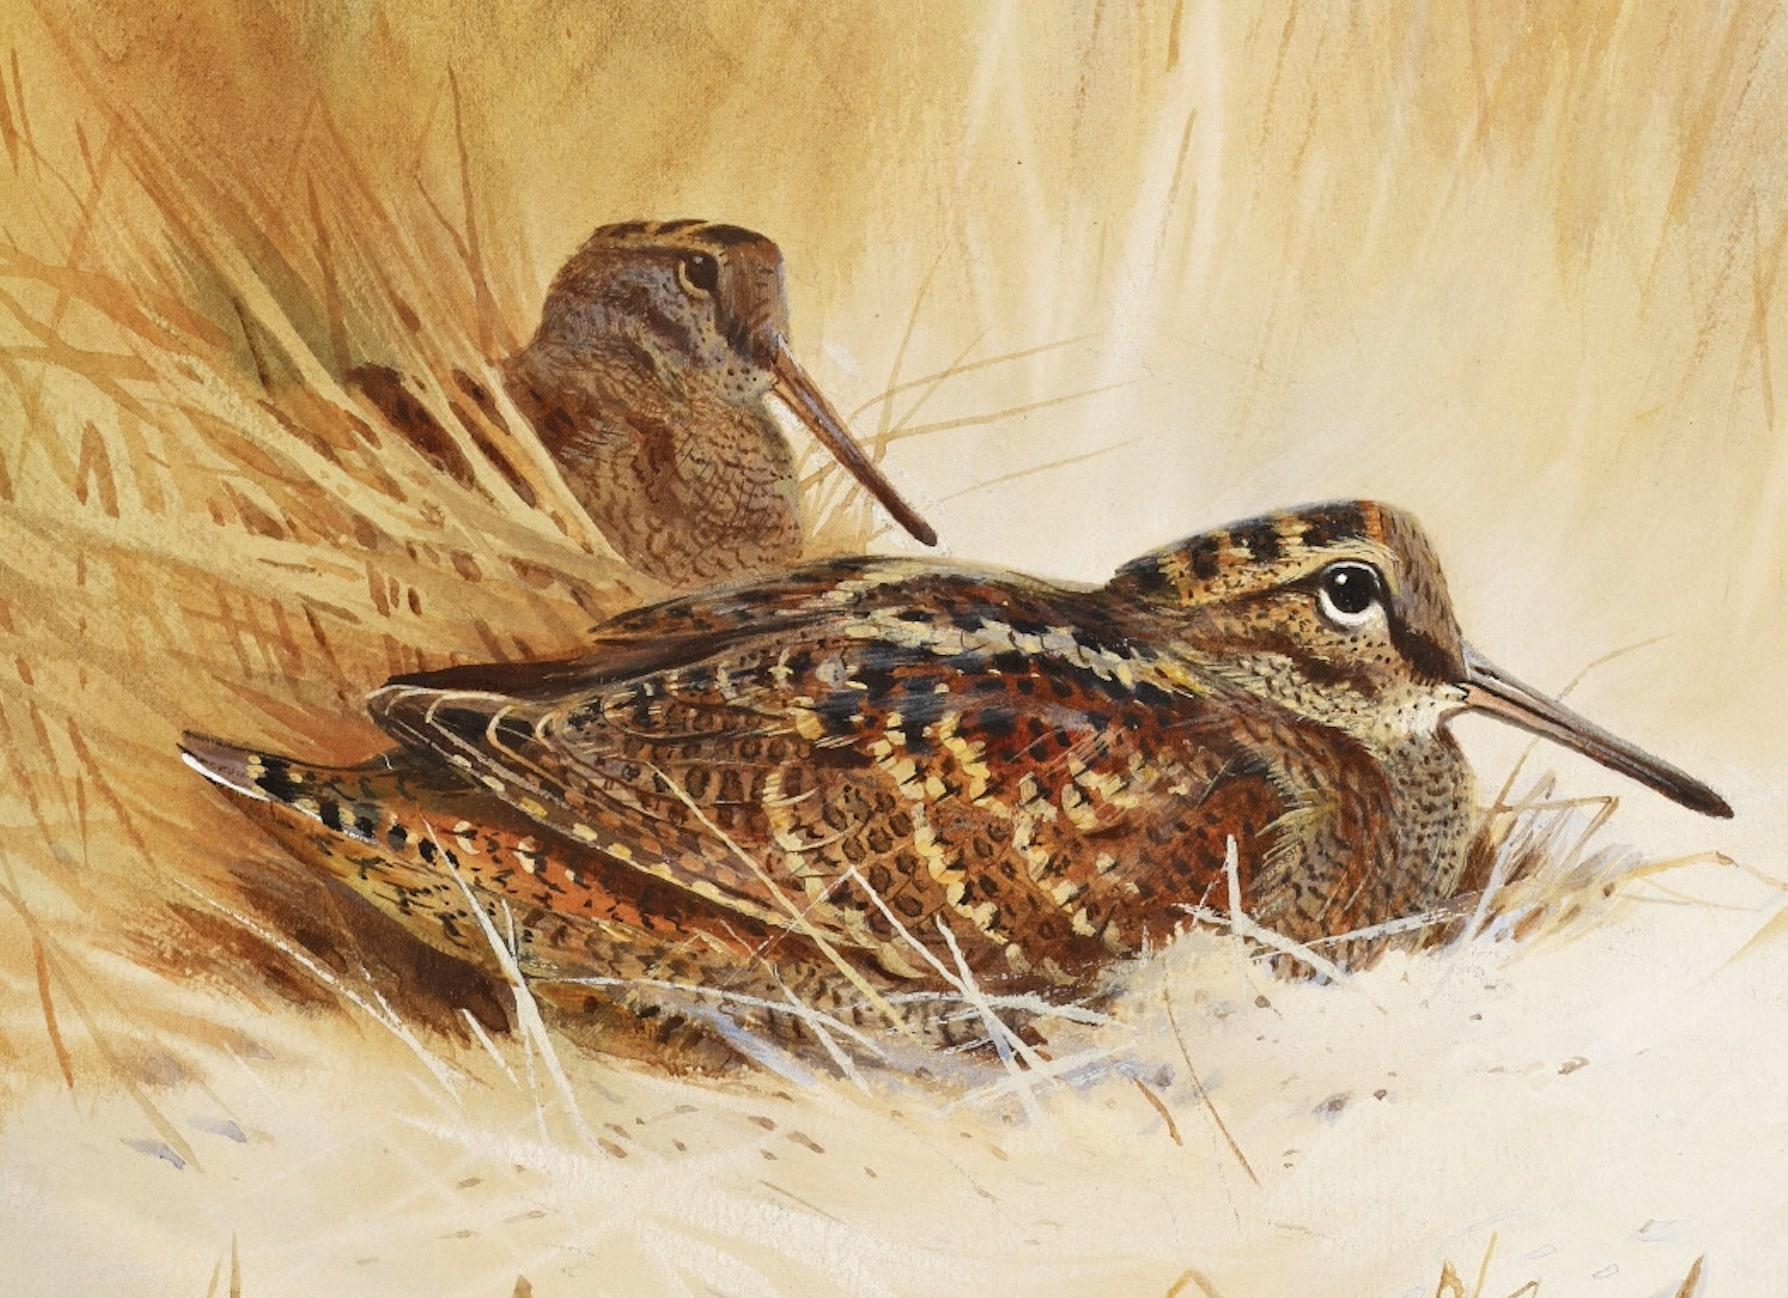 A Rare, Original Watercolour by Archibald Thorburn, Depicting a Woodcock Among The Dunes. This is an excellent example of his work, presented in fantastic condition. An opportunity not to be missed.
Signed and Dated (1918)
Approx 8